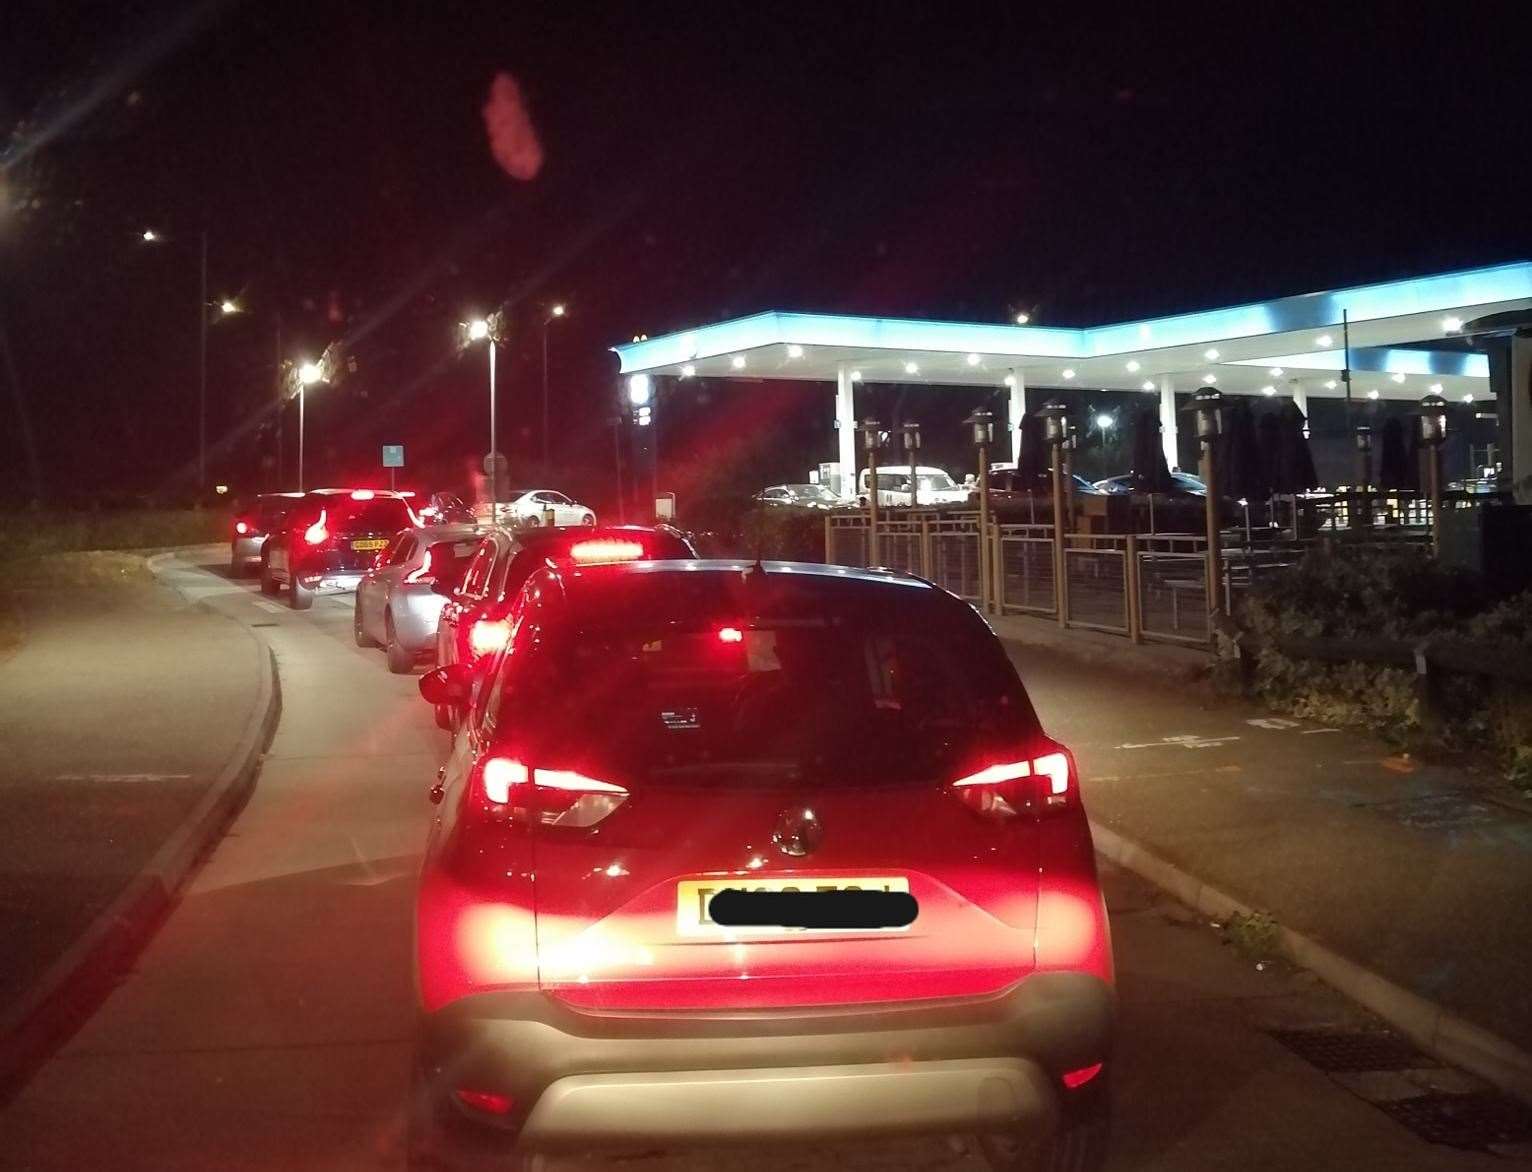 Fuel queues were piling up at 2.30am at the filling station at Minster services near Manston Airport. Picture: Timothy Wooding /Facebook